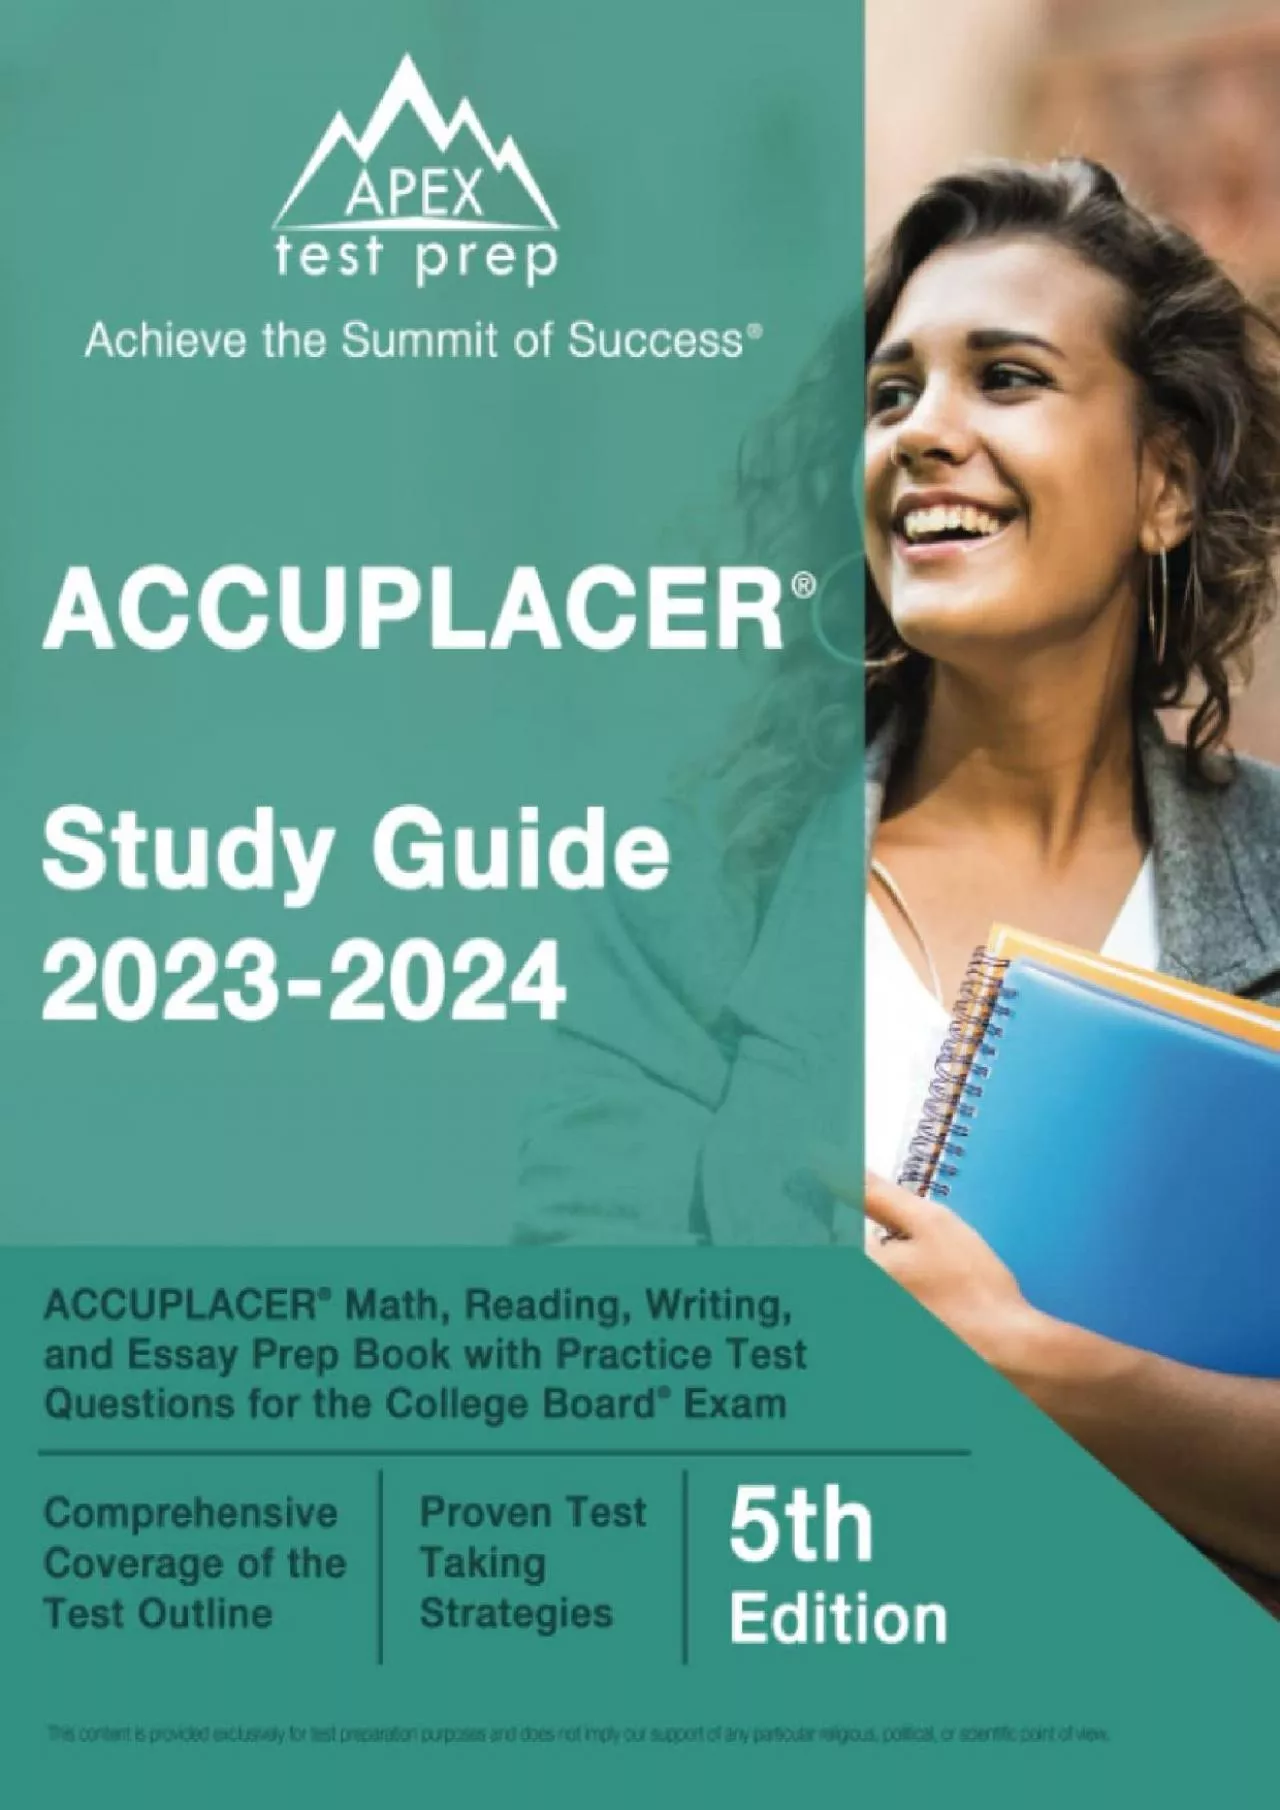 [DOWNLOAD] ACCUPLACER Study Guide 2023-2024: ACCUPLACER Math, Reading, Writing, and Essay